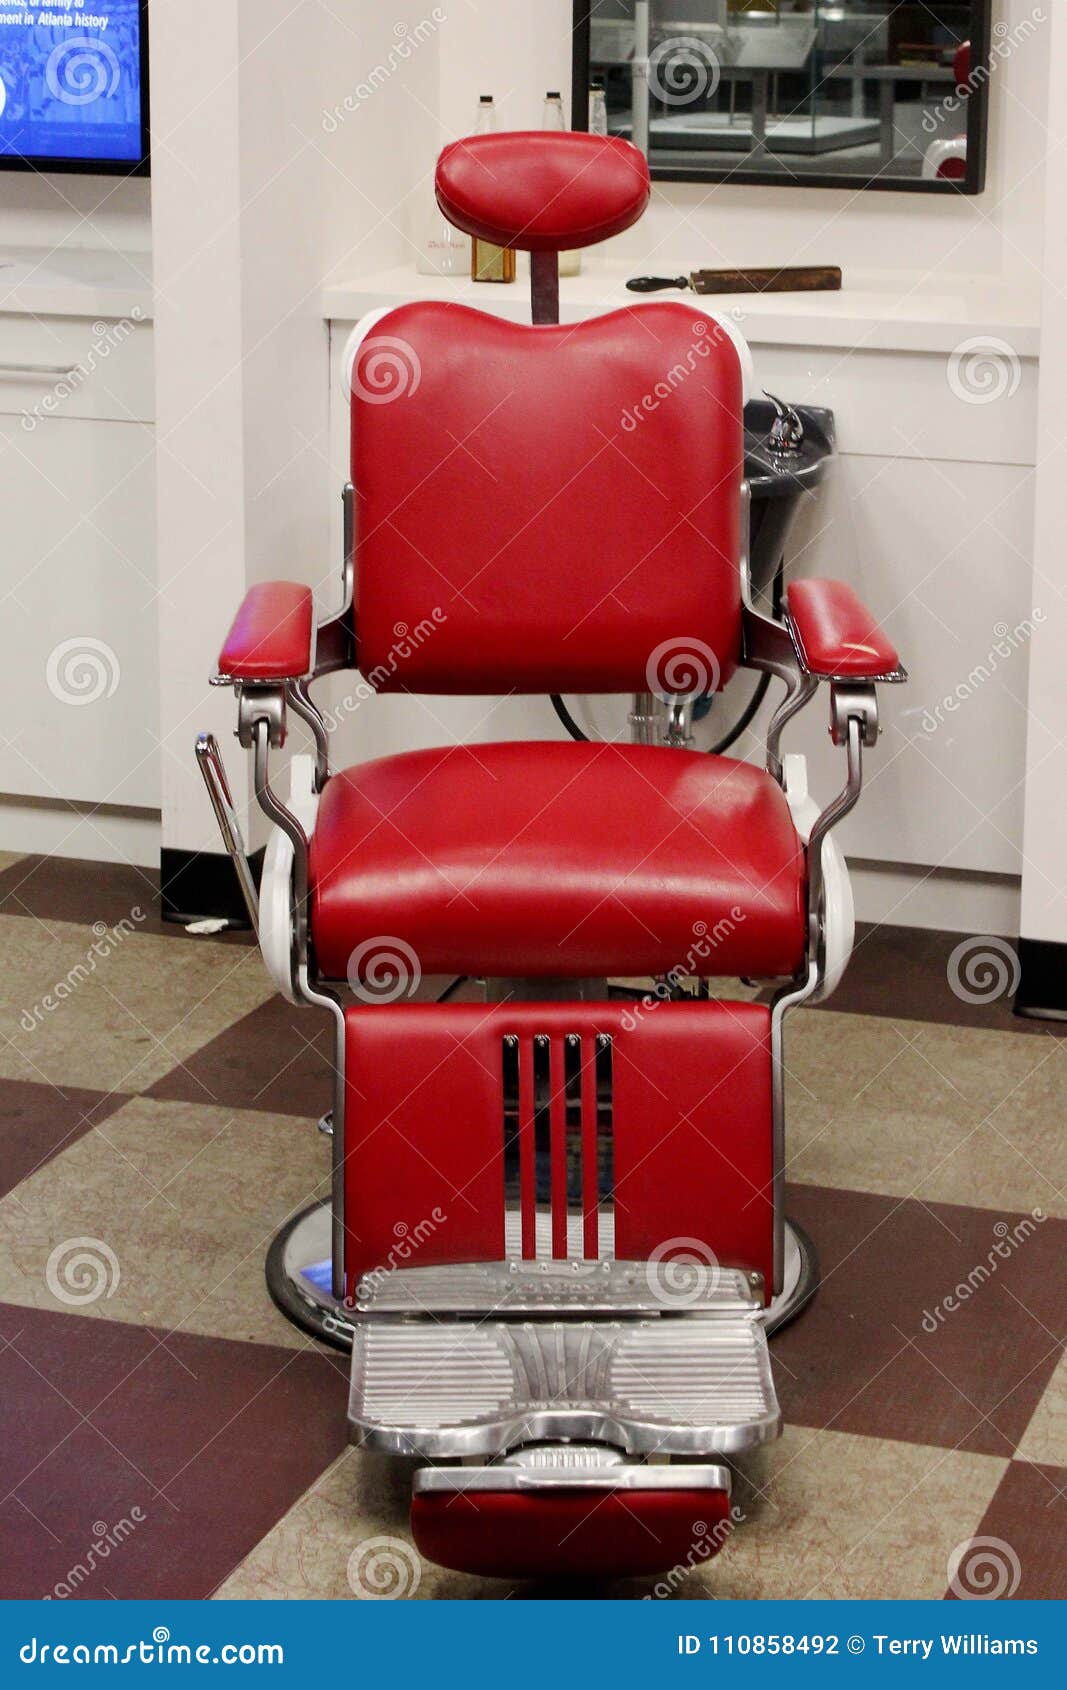 Classic Red Barbershop Chair Stock Photo Image Of Vintage